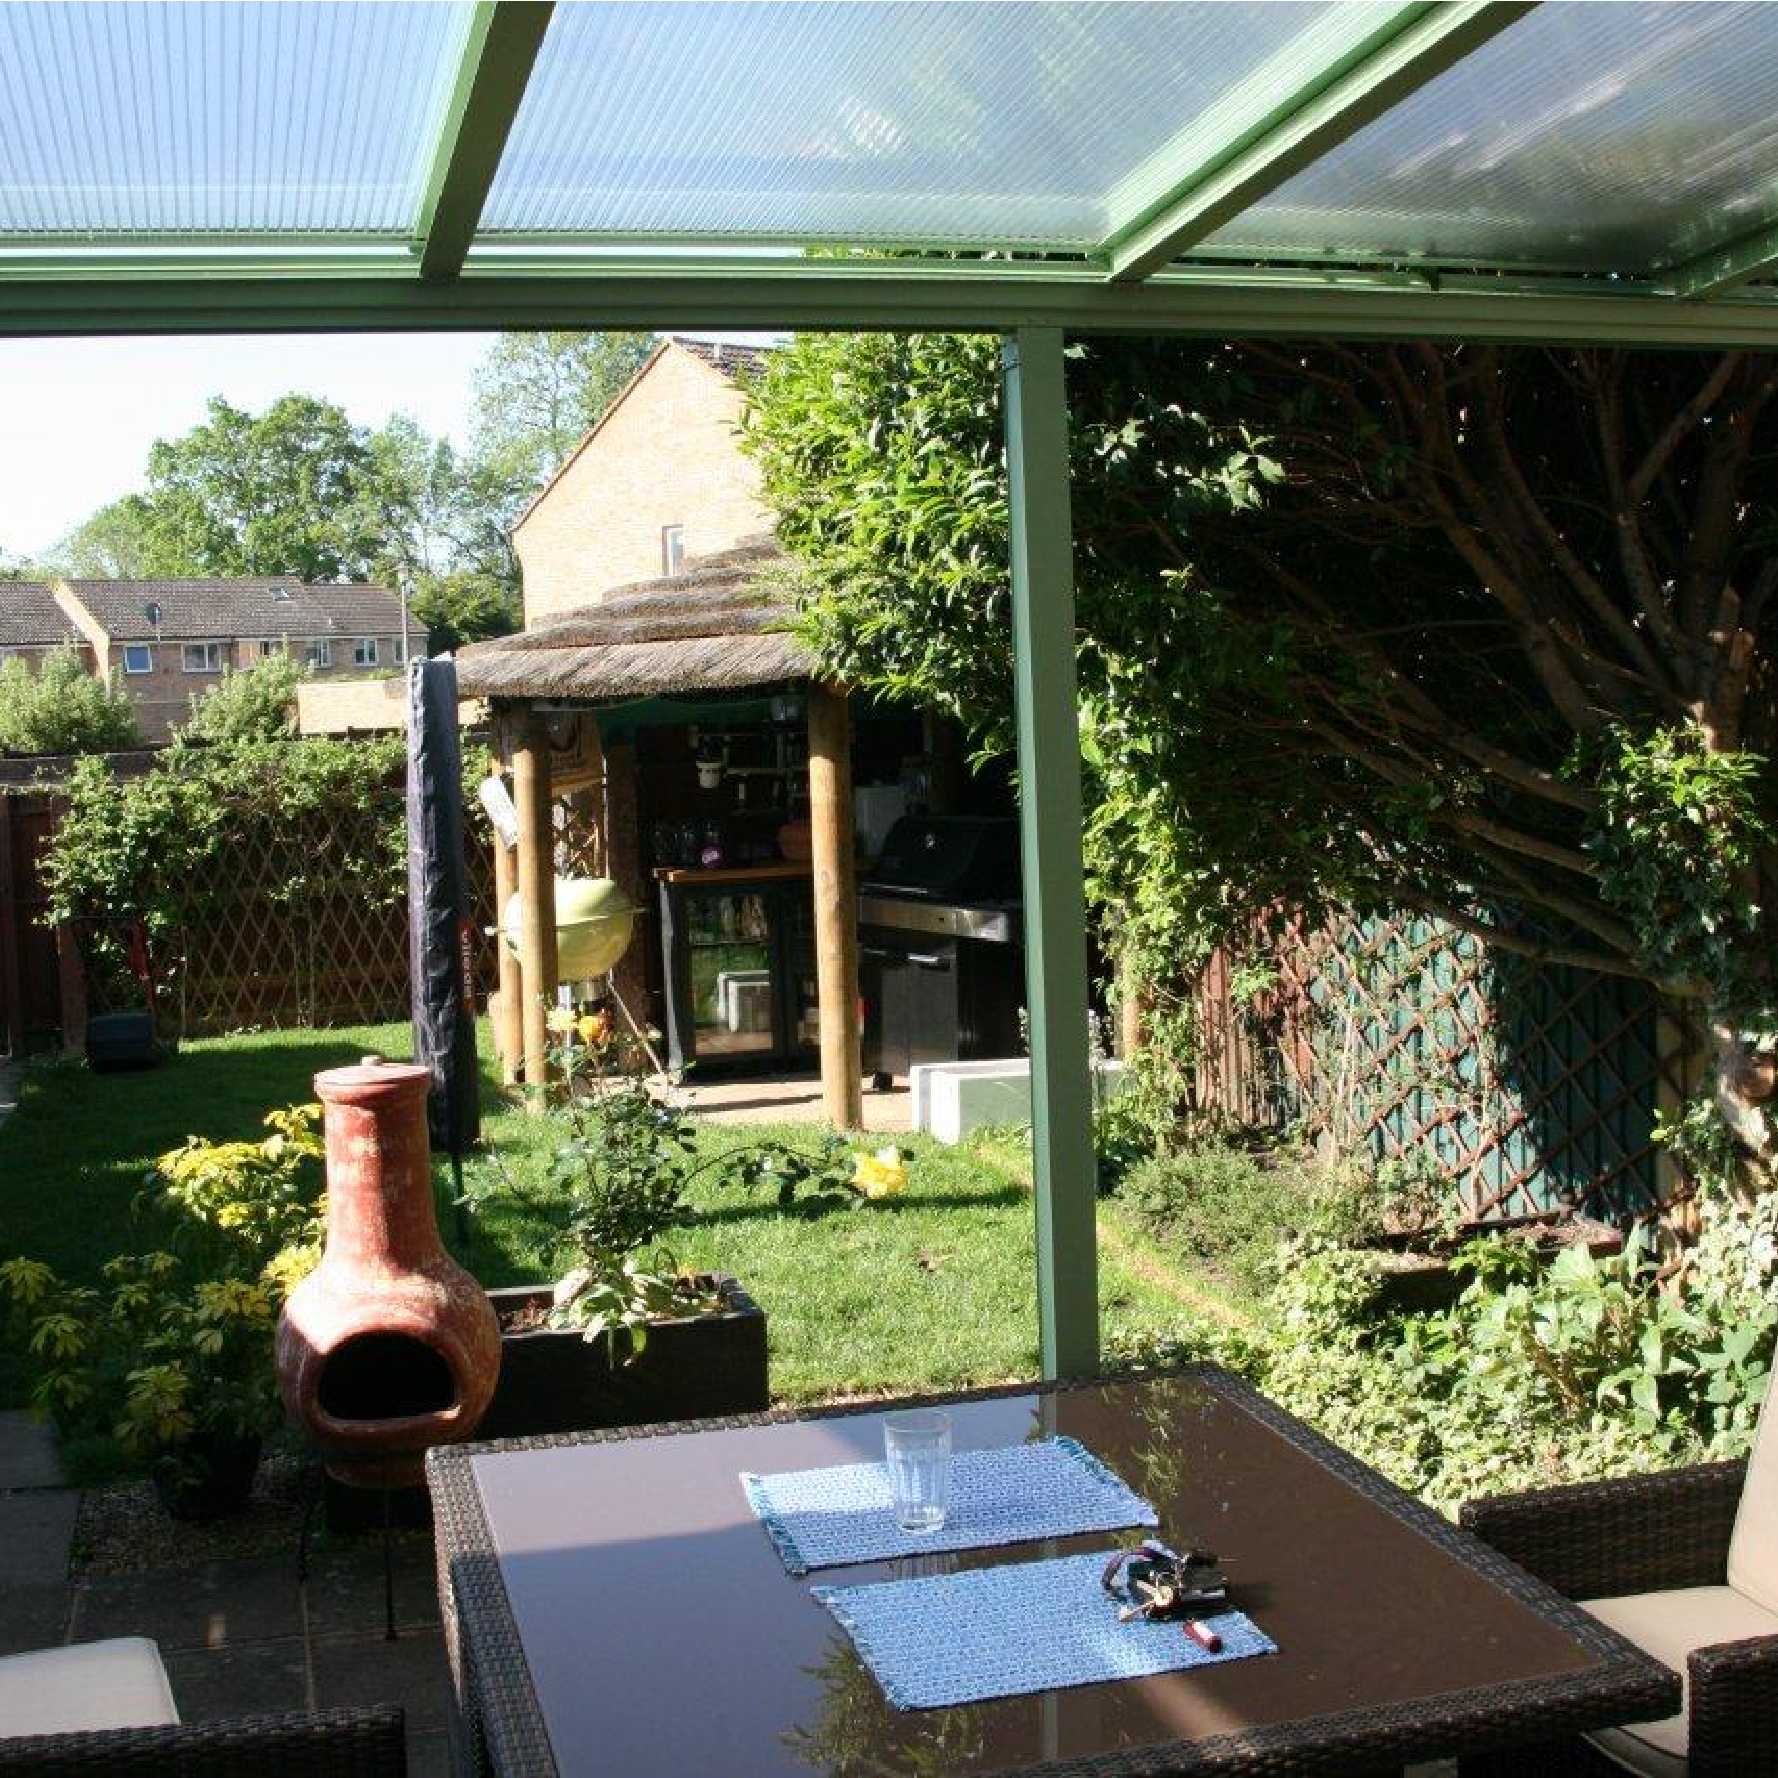 Affordable Omega Smart Lean-To Canopy, White with 16mm Polycarbonate Glazing - 3.1m (W) x 4.5m (P), (2) Supporting Posts